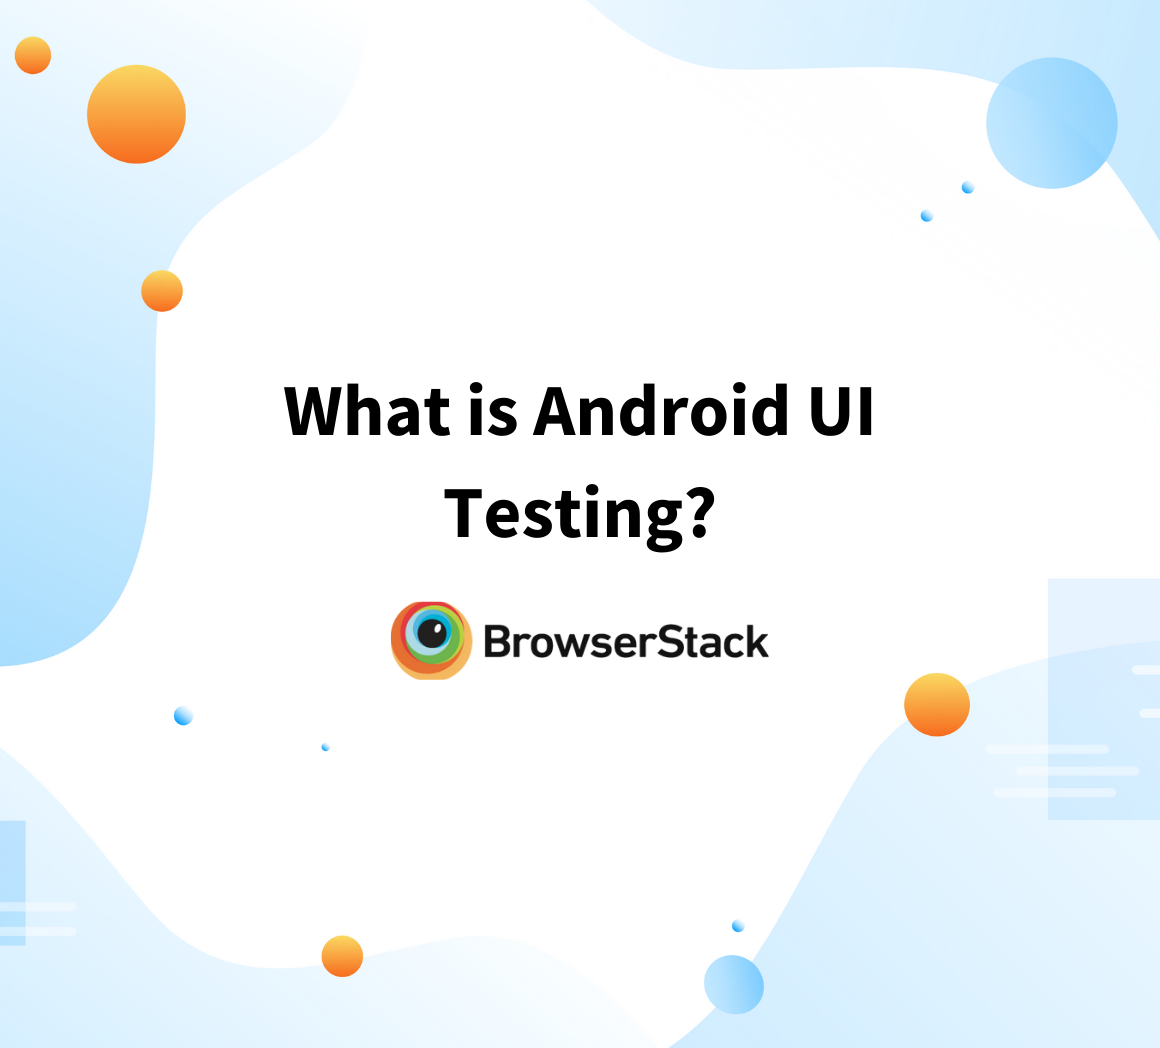 What is Android UI Testing?